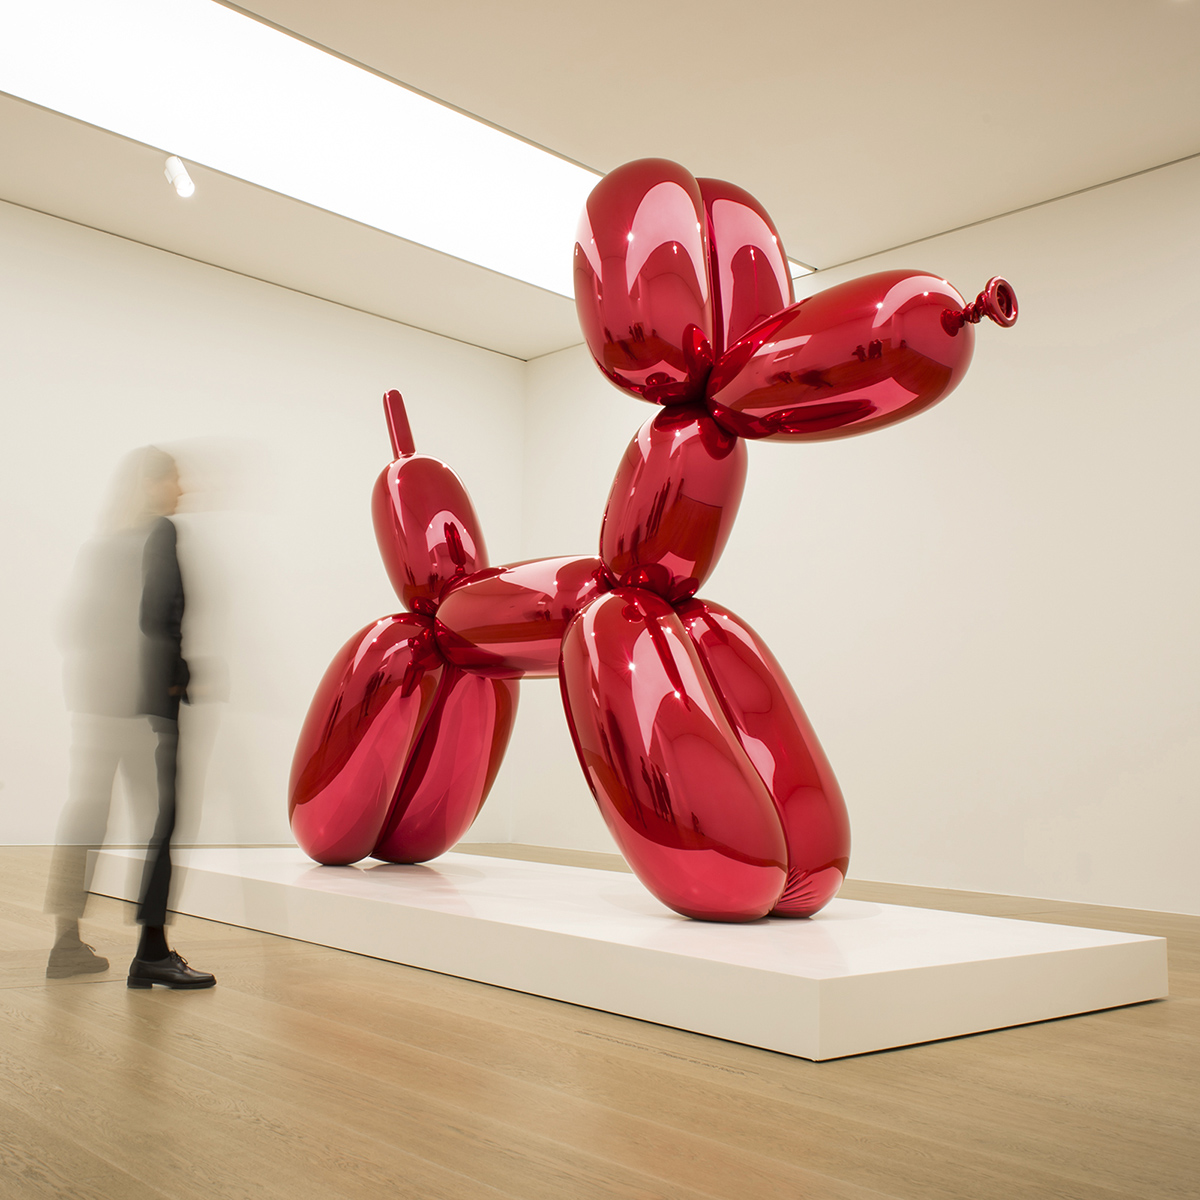 Jeff Koons on Twitter: "“Balloon Dog (Red)” installed at “Icons: Worship and Adoration” until March 1, 2020. The sculpture has a mythic and ritualistic quality. “Balloon Dog (Red)” (1994-2000) @Kunsthalle_HB © Jeff